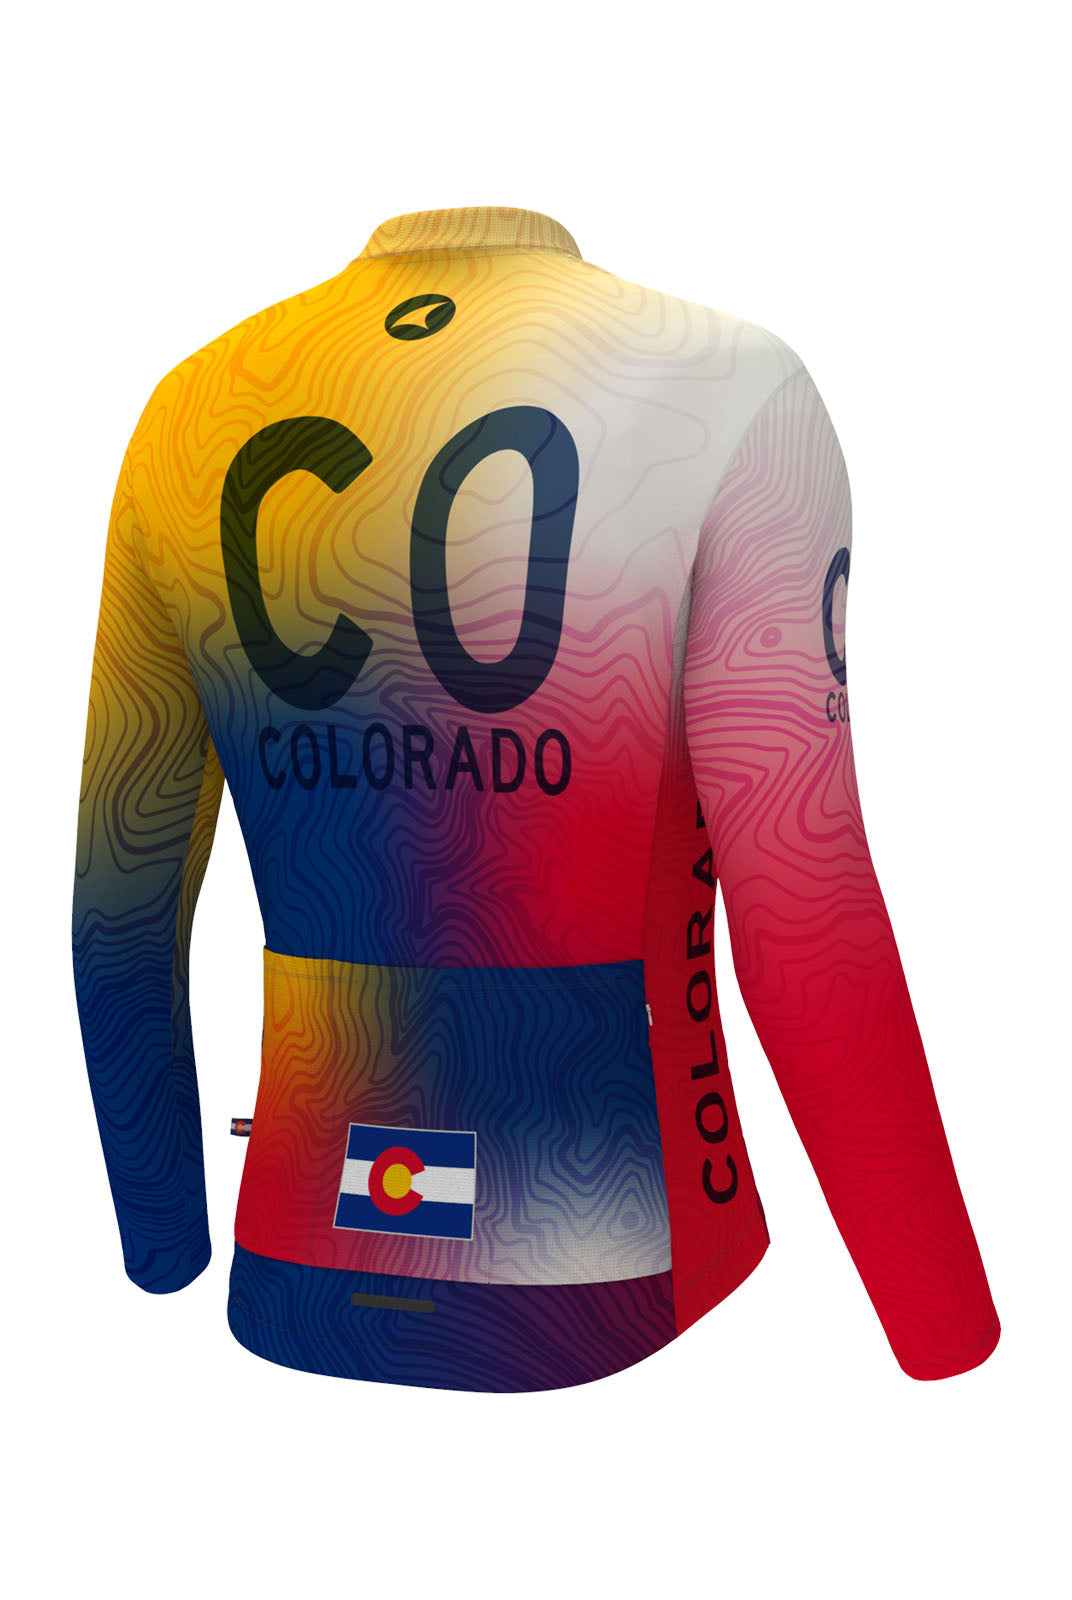 Men's Colorado Flag Long Sleeve Cycling Jersey - Back View